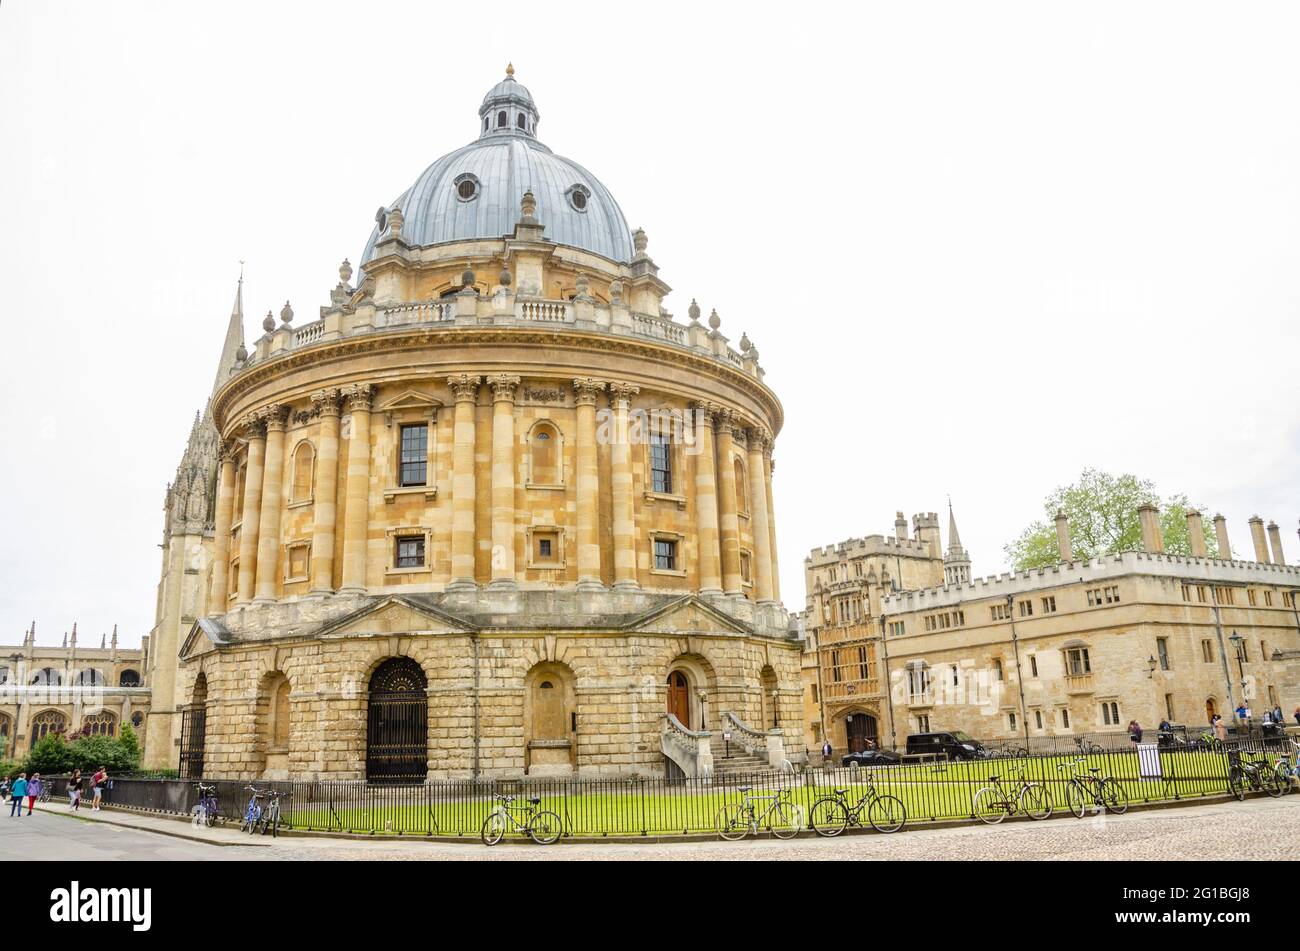 Radcliffe Camera on Catte Street in Oxford, designed by James Gibbs in a neo-classical style is an iconic landmark at the centre of Oxford Stock Photo